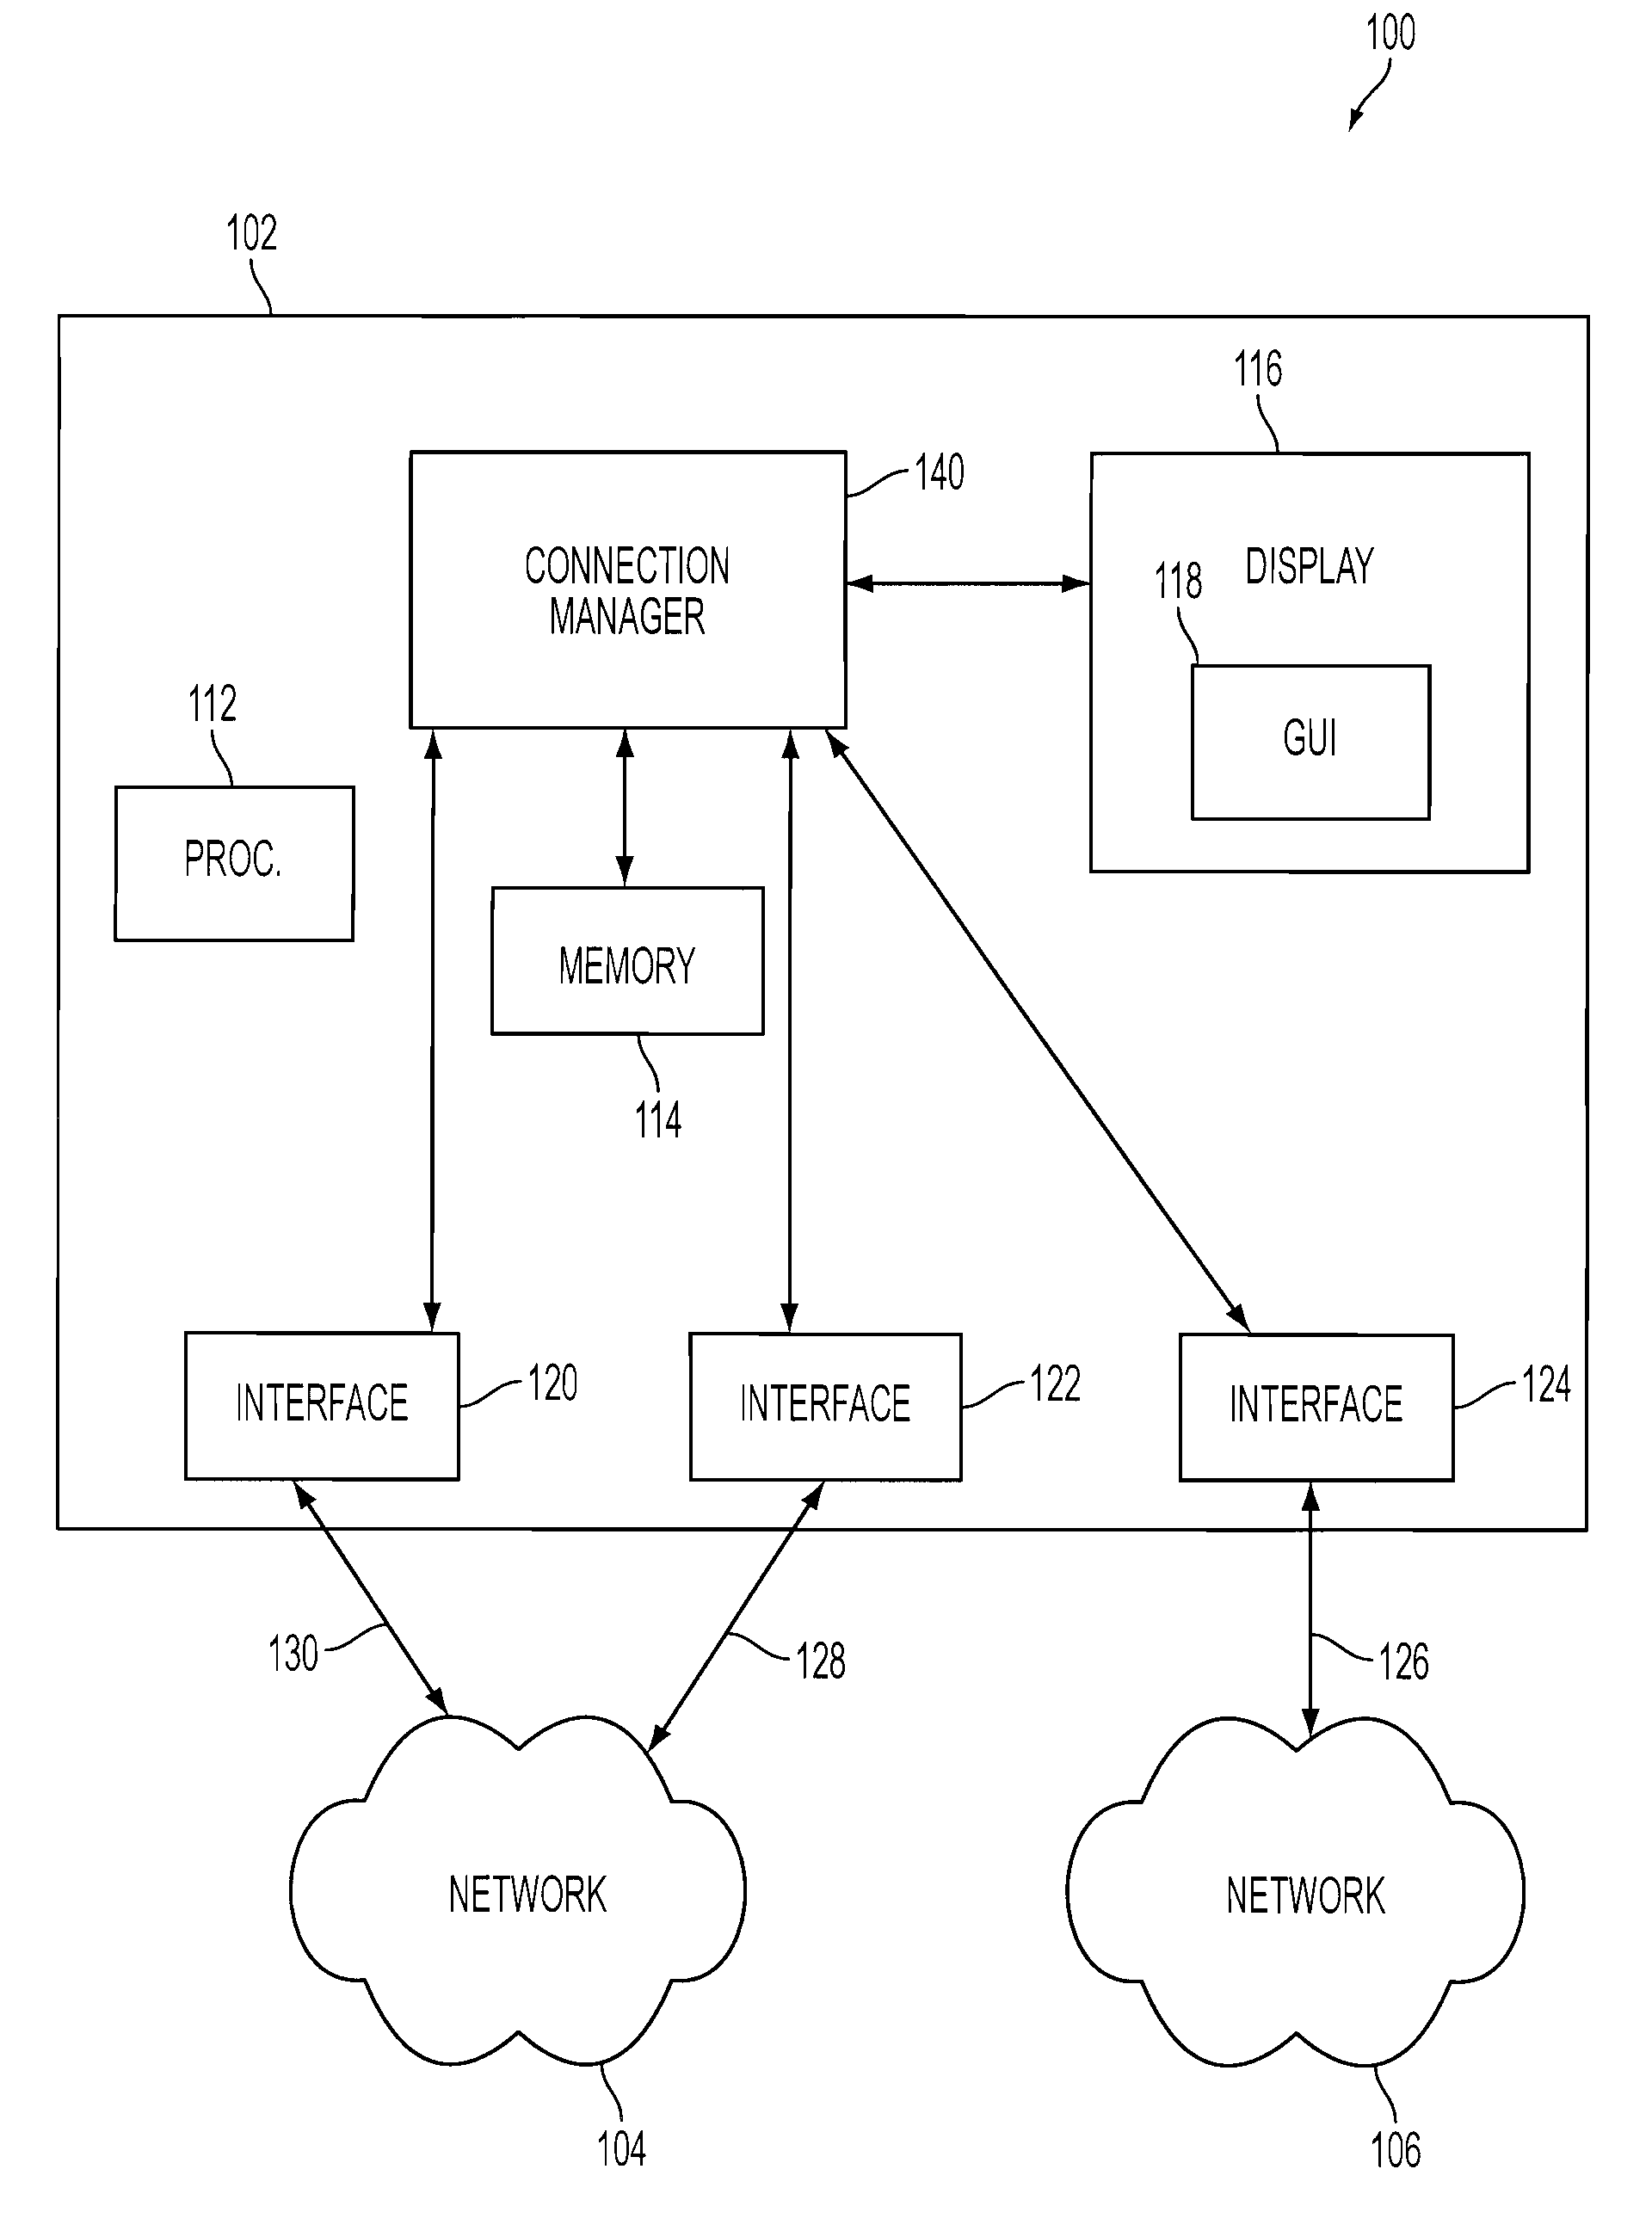 Multi-interface management configuration method and graphical user interface for connection manager